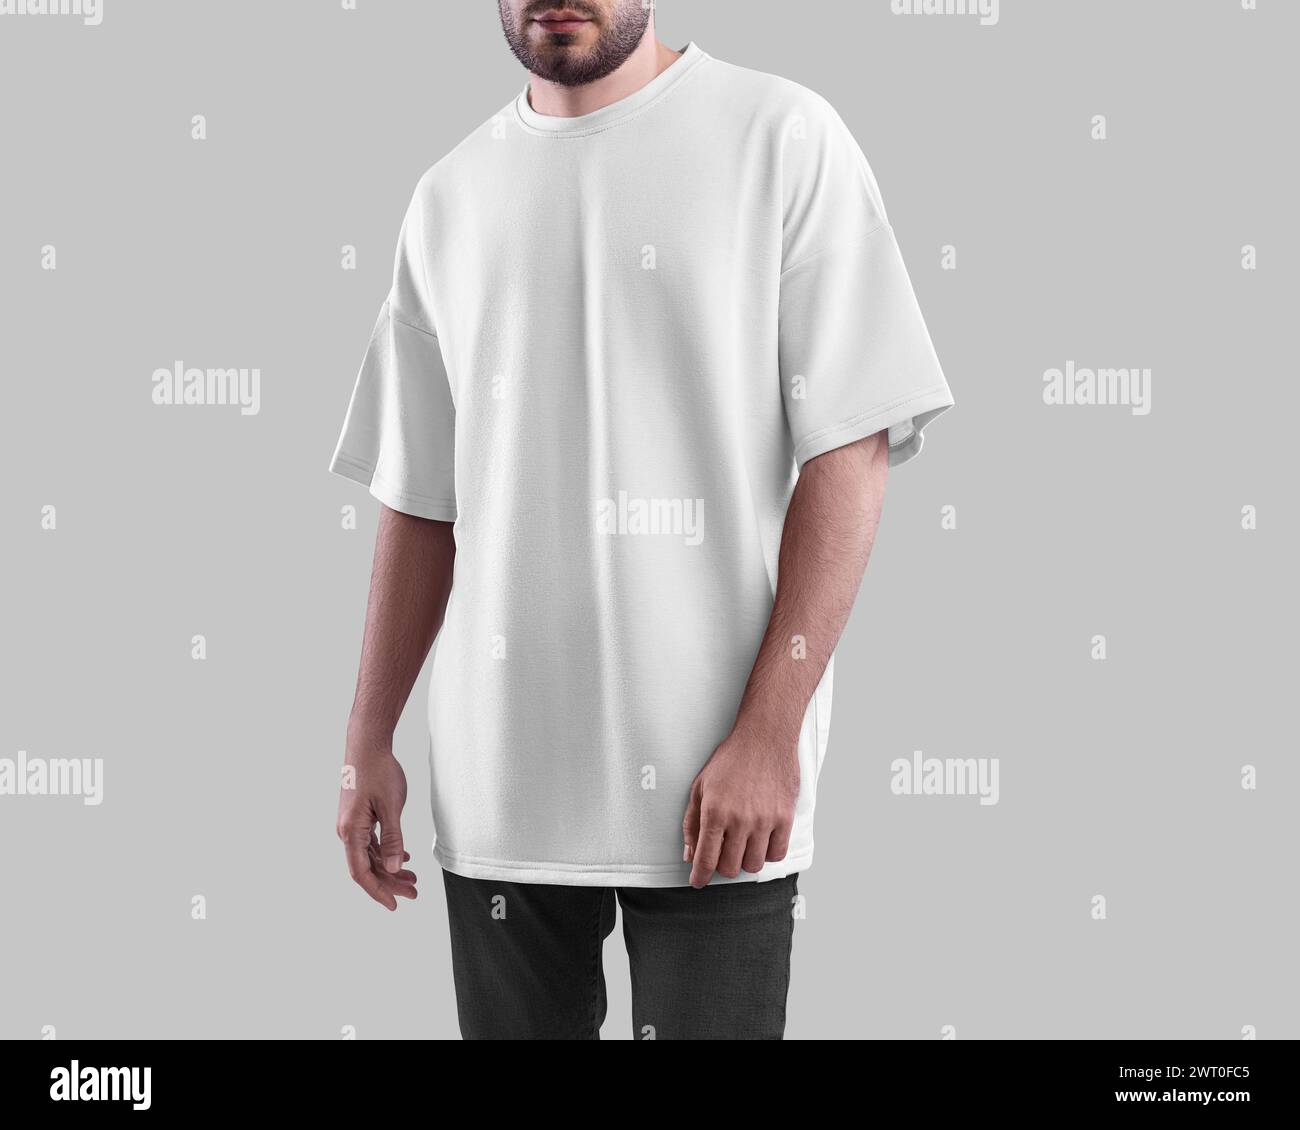 Oversized white t-shirt mockup on bearded man, fashion streetwear for design, print, pattern, branding, front view. Template textured casual apparel, Stock Photo